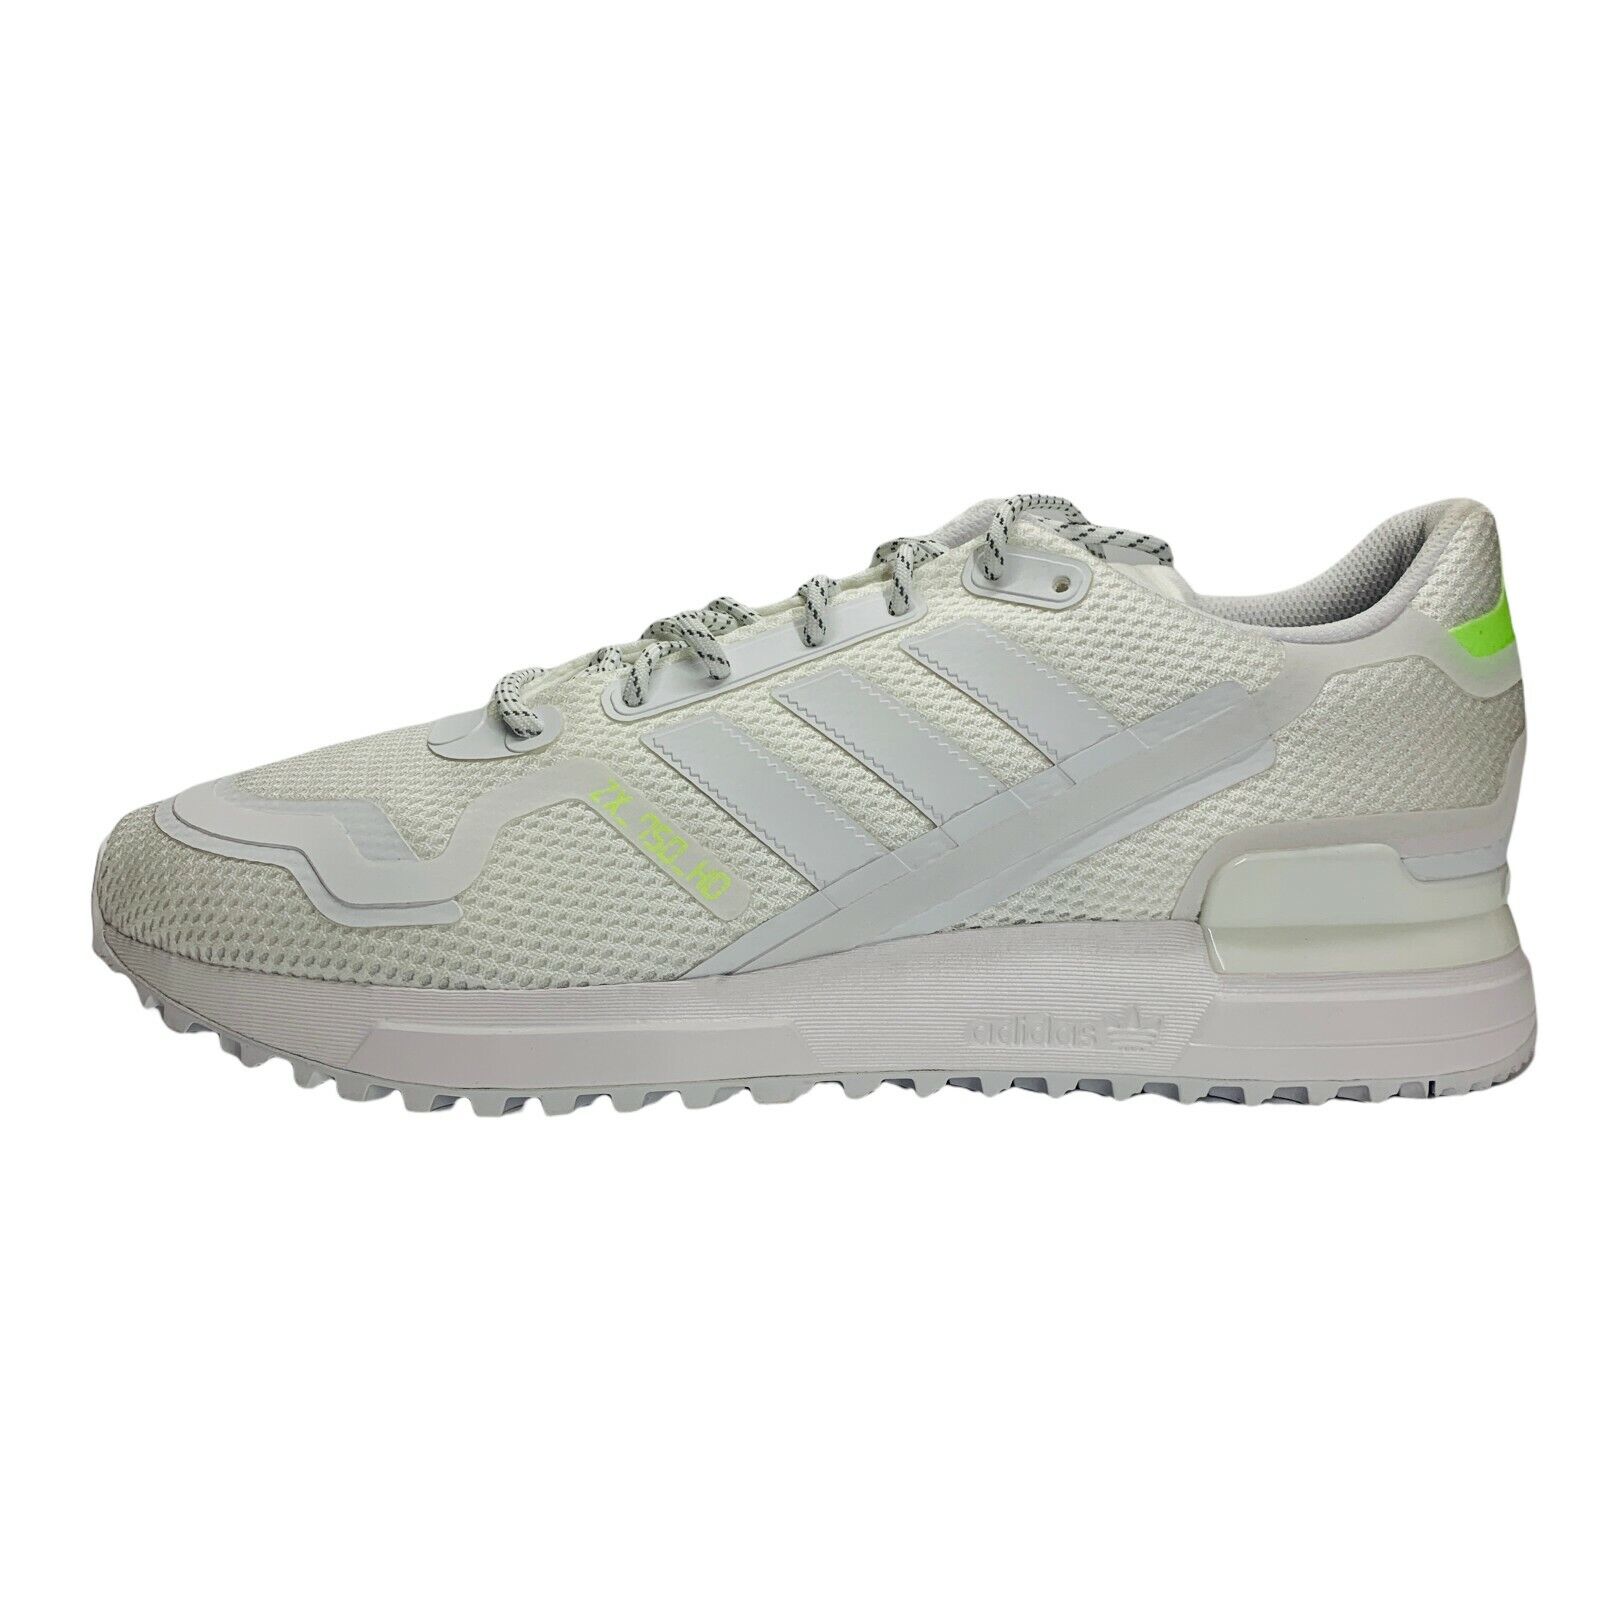 Adidas Originals Mens ZX 750 HD FV8490 White Lace Up Low Top Running Shoes  Sz 12